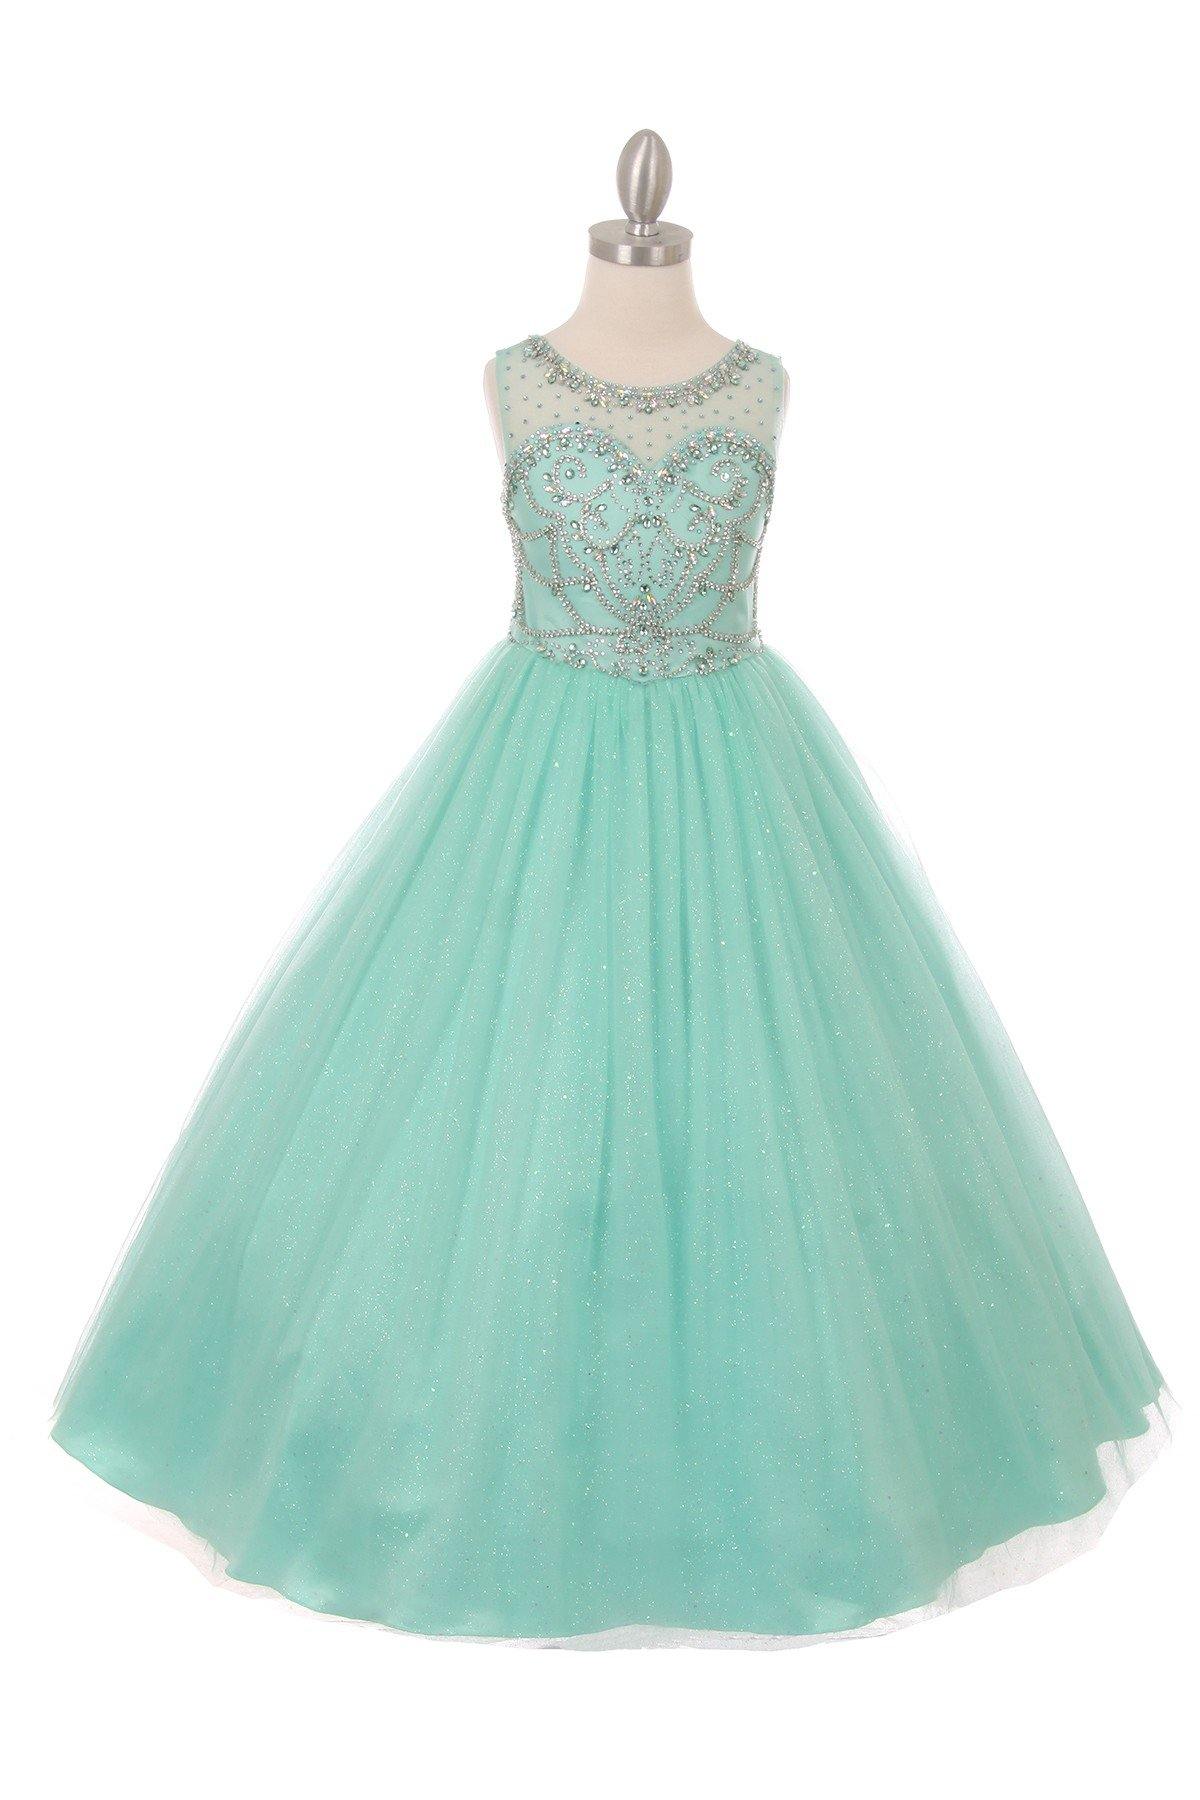 Long Beaded Party Flower Girl Dress - The Dress Outlet Cinderella Couture